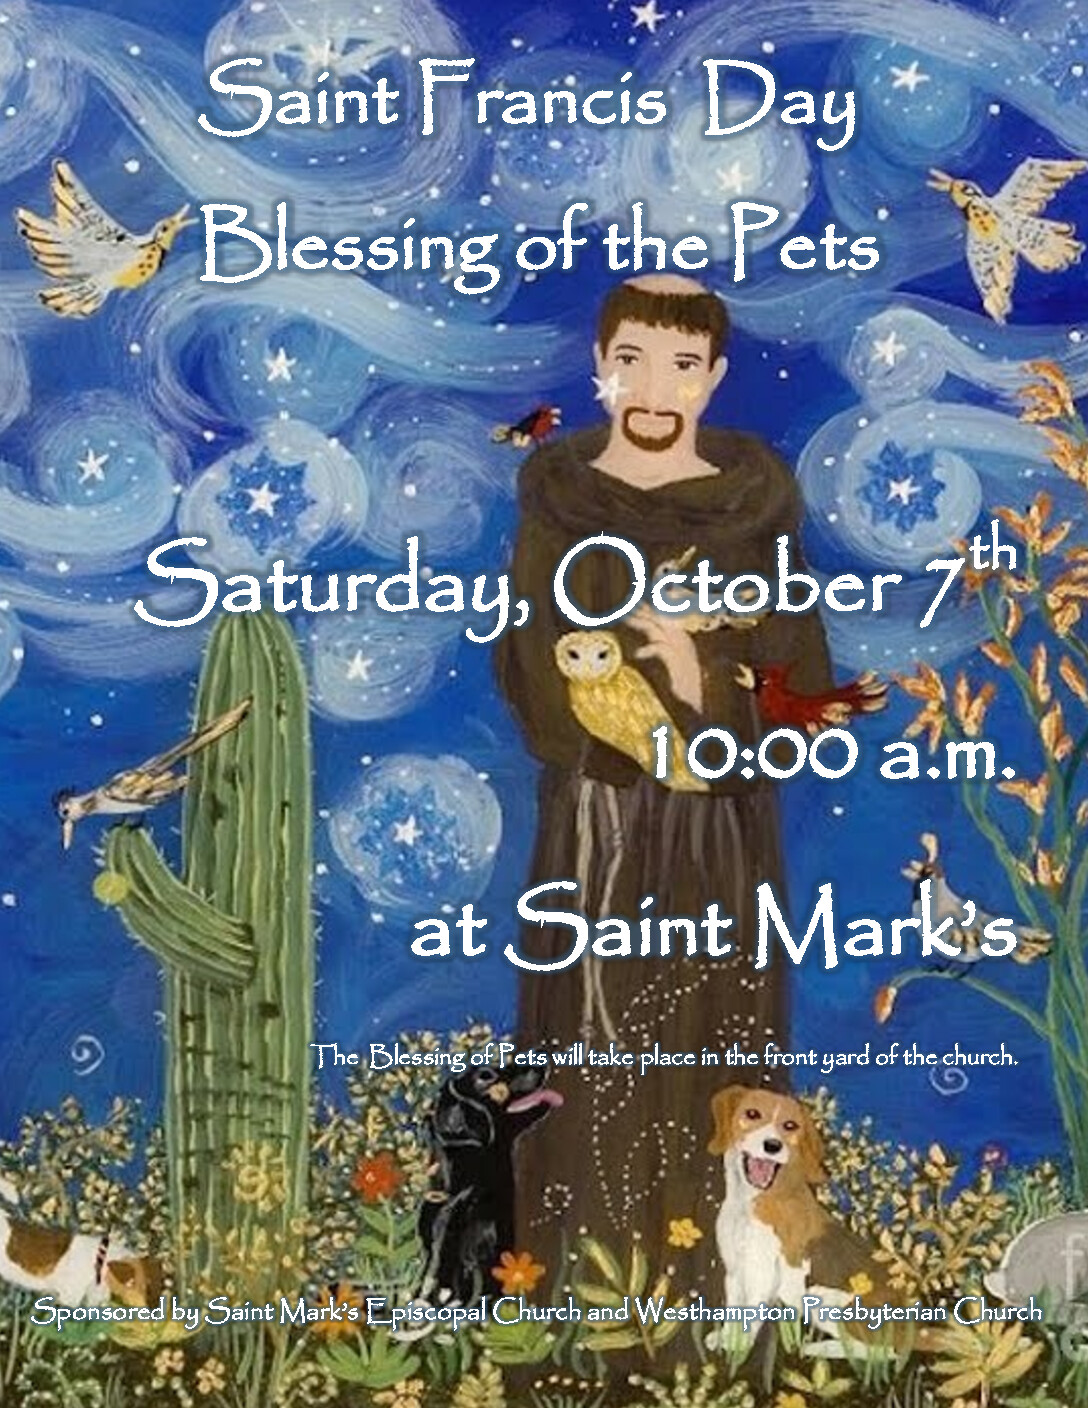 Saint Francis Day Blessing of the Pets